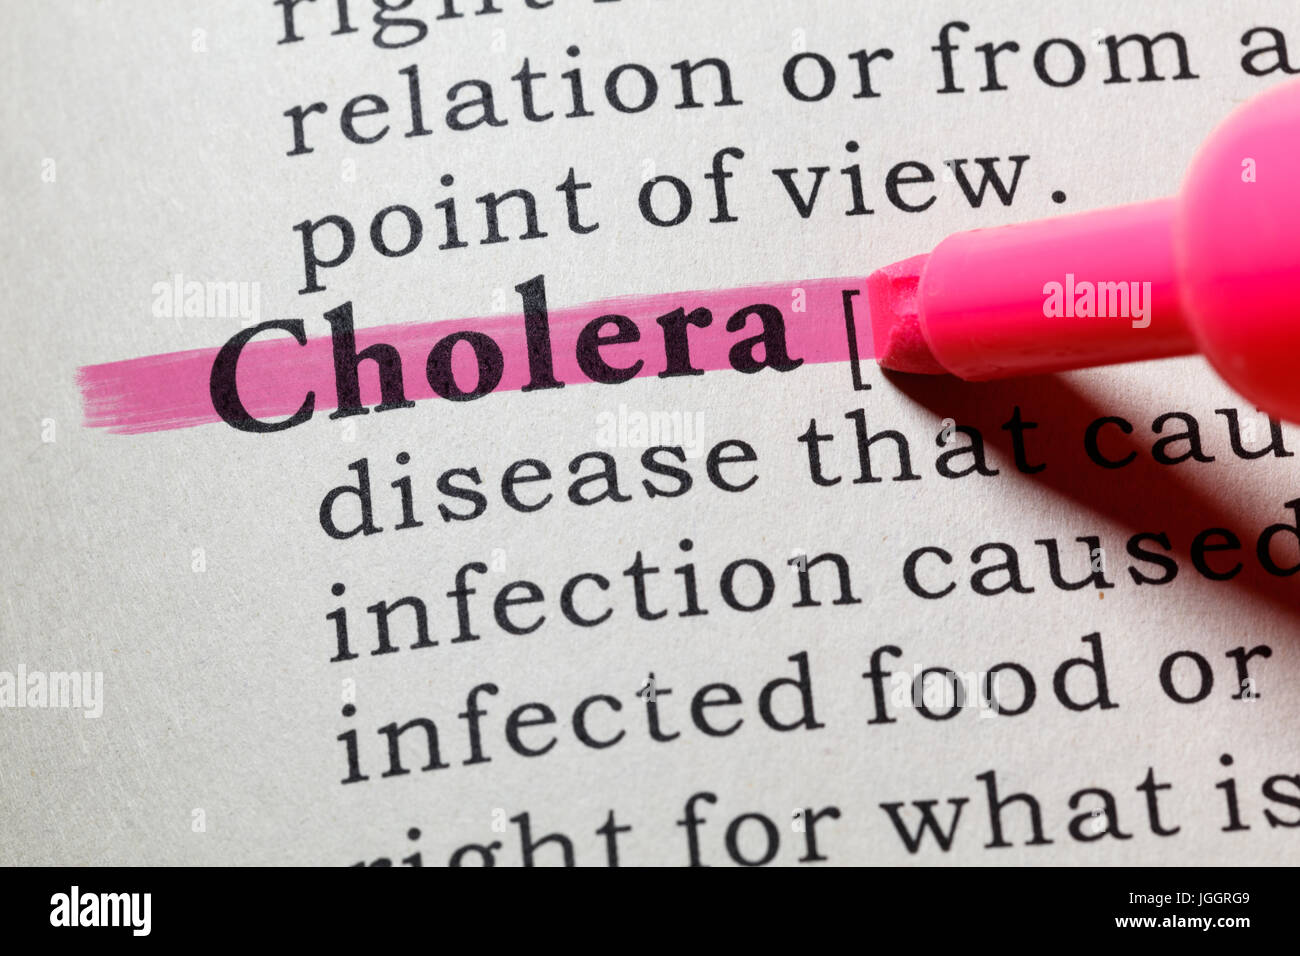 Fake Dictionary, Dictionary definition of the word cholera. including key descriptive words. Stock Photo